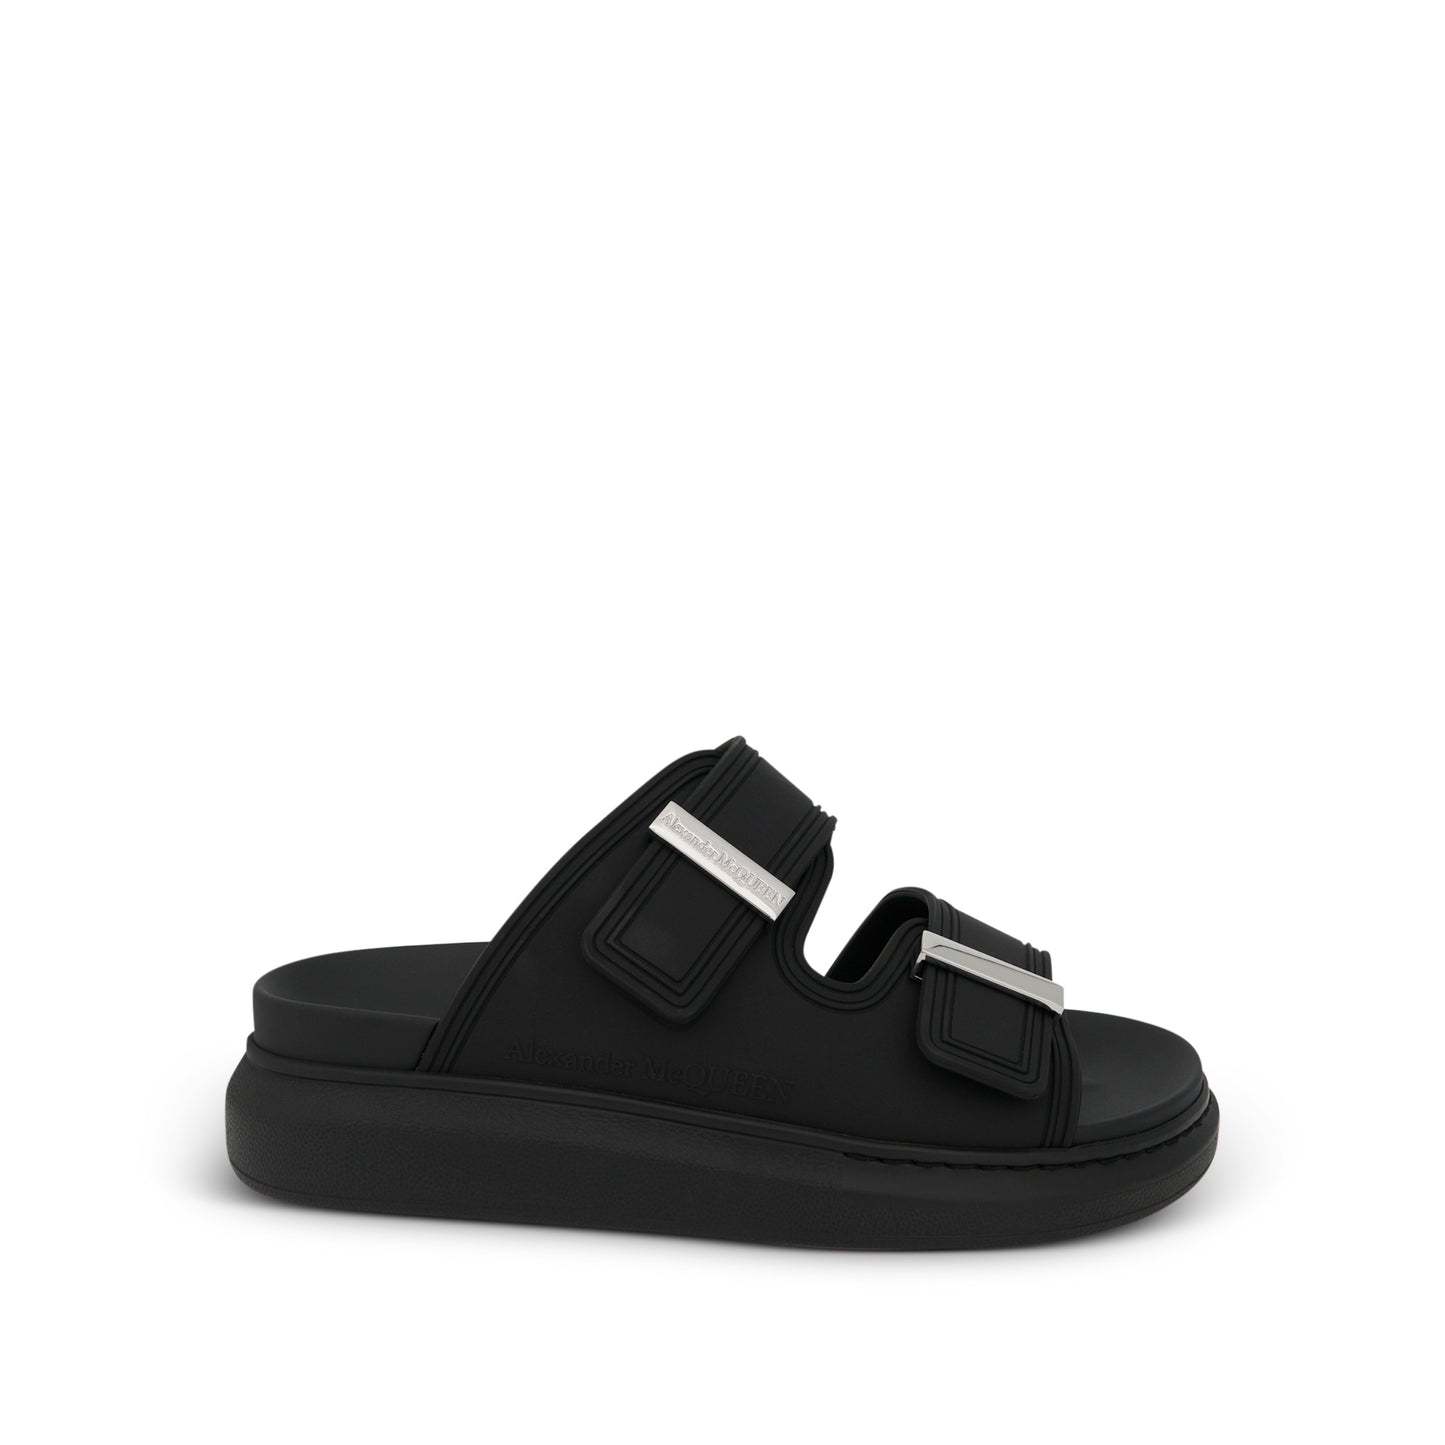 Oversized Double Strap Sandals in Black/Silver